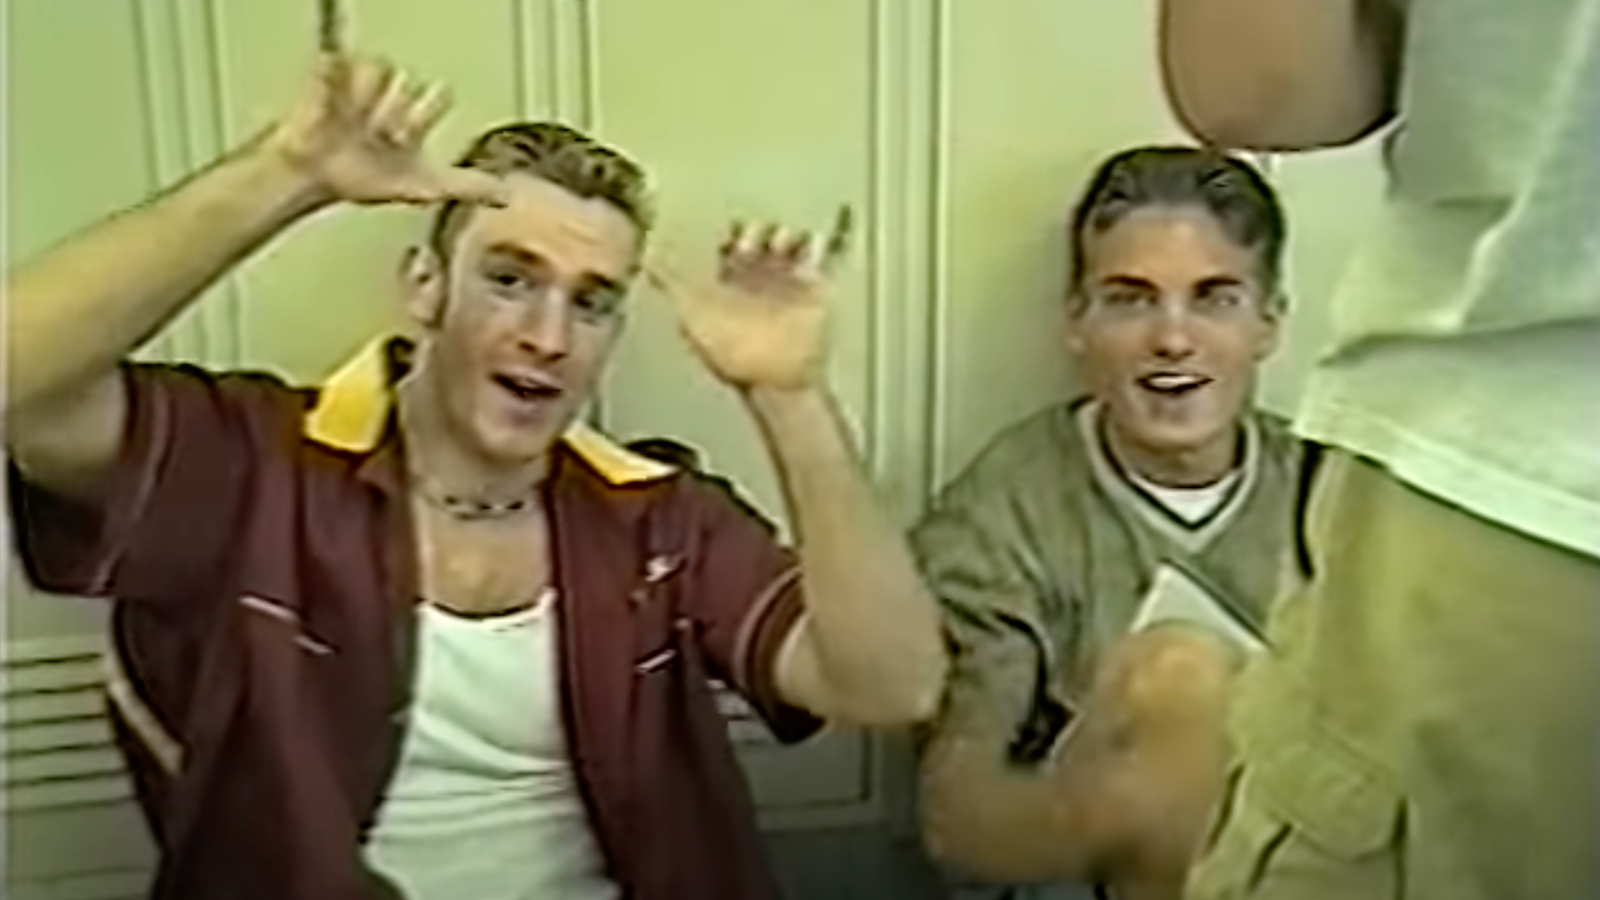 The Surprising Thing I Noticed Watching Videos Of High School Students From the 90s